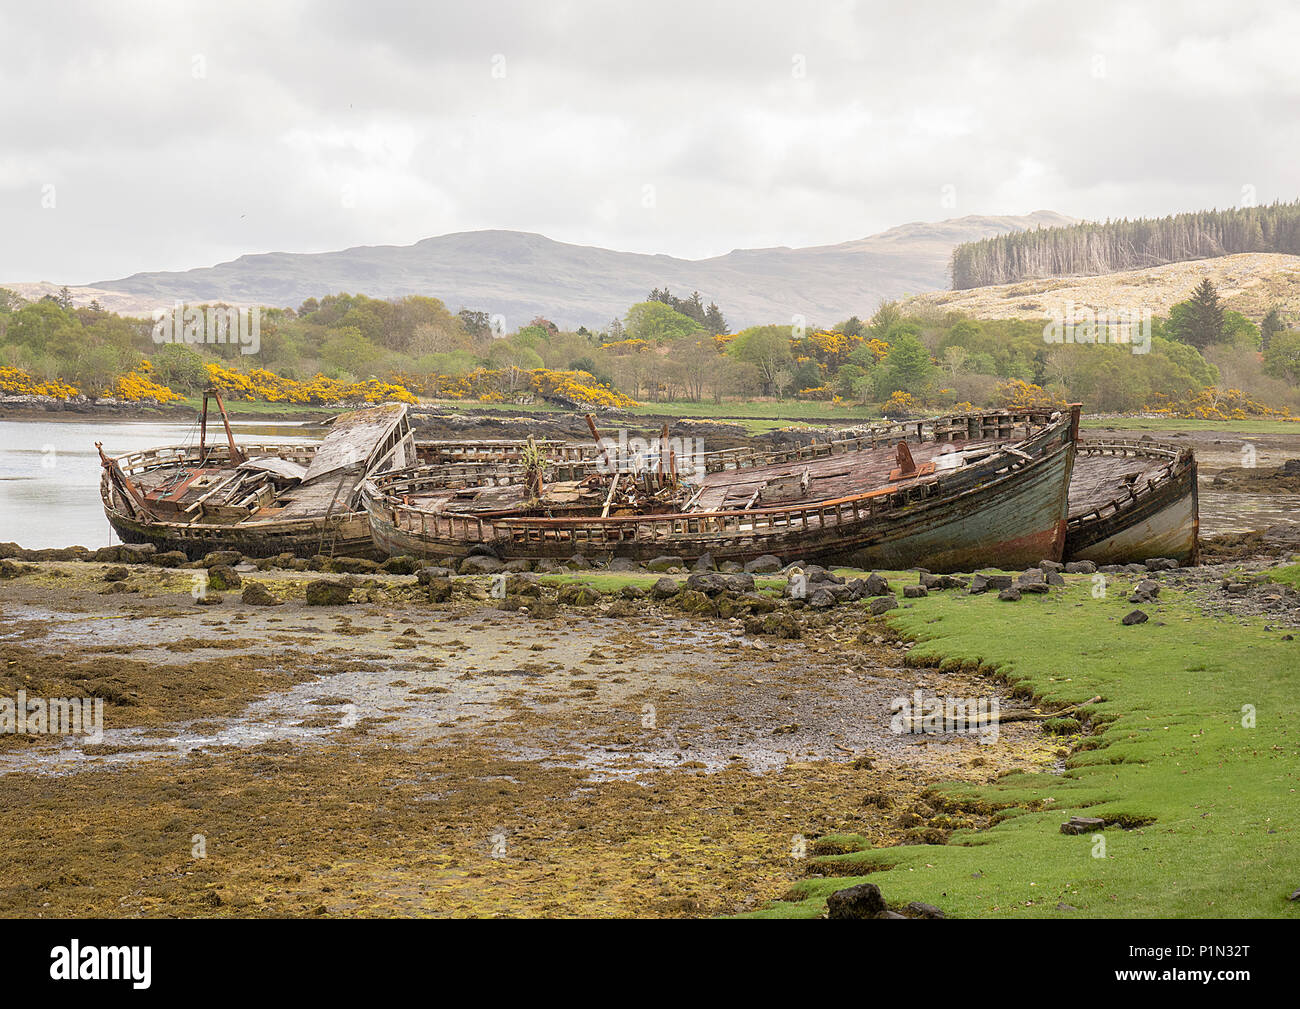 An Abandoned Fishing Boat Trawler Used in Fishing Industry Spotted